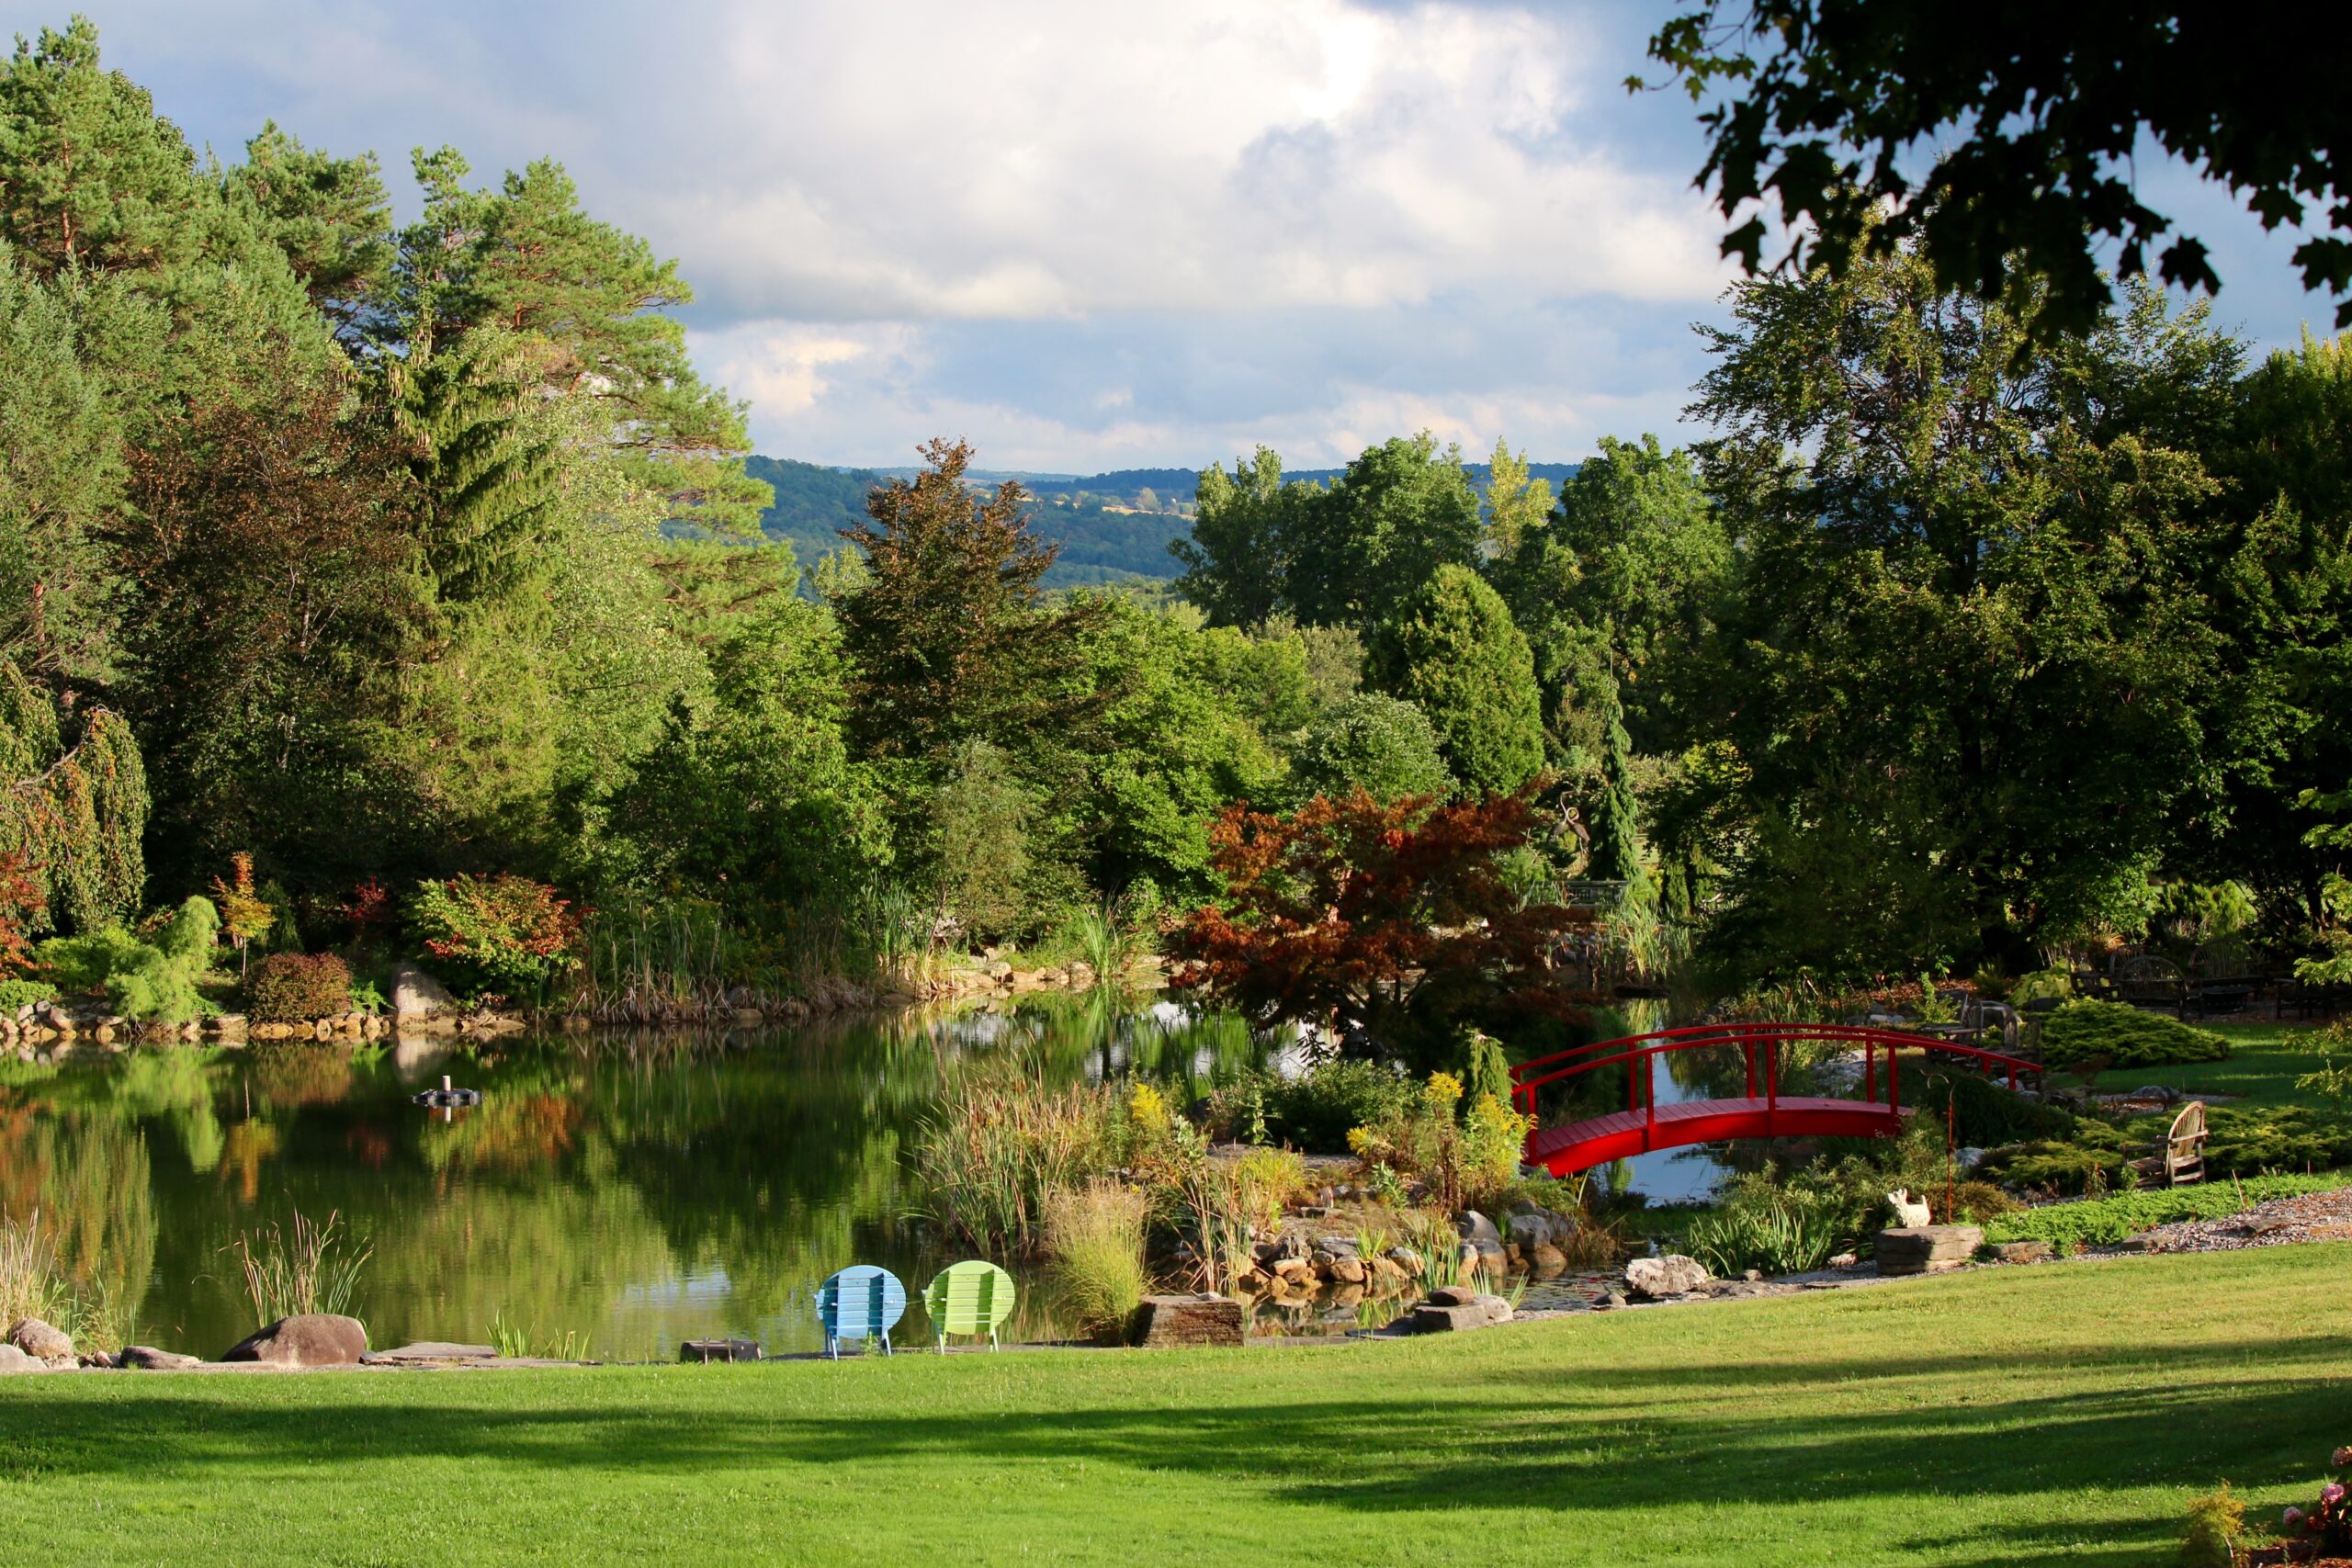 Green lawn, blue sky, a myriad of trees, and a pond with Adirondack chairs.